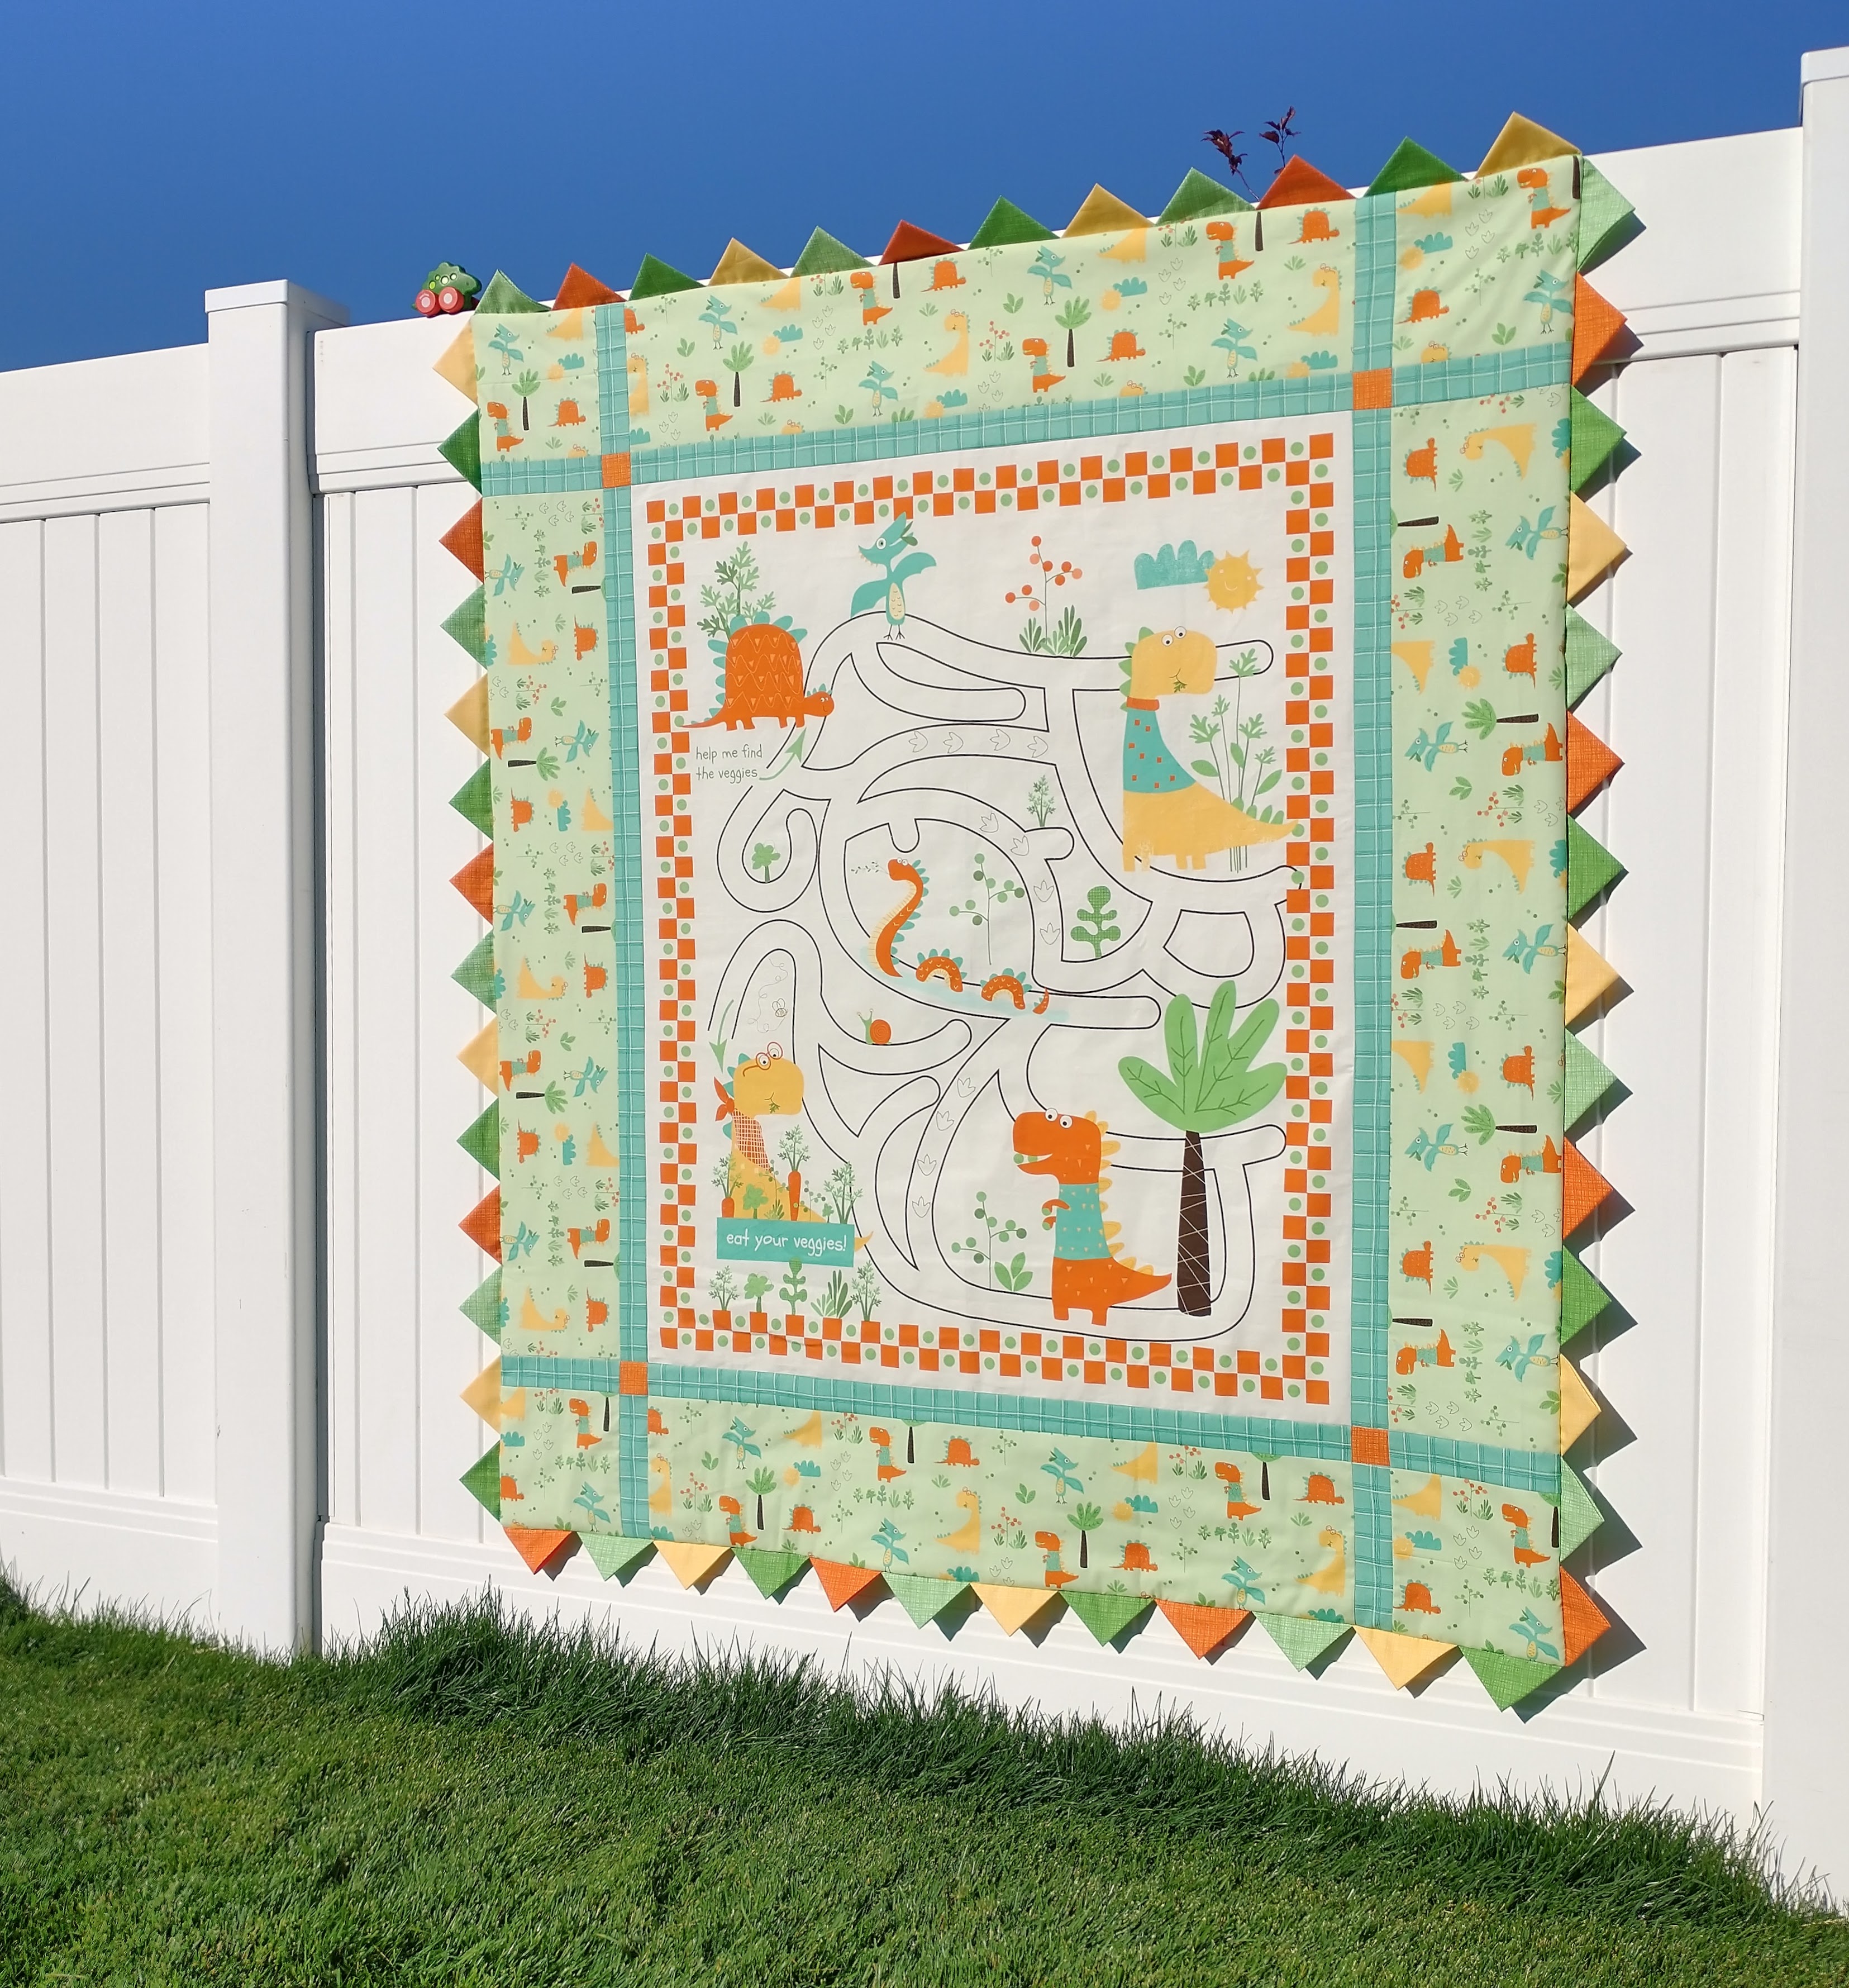 Quiltscapes.: Fancy Finishes: Ric-Rac!